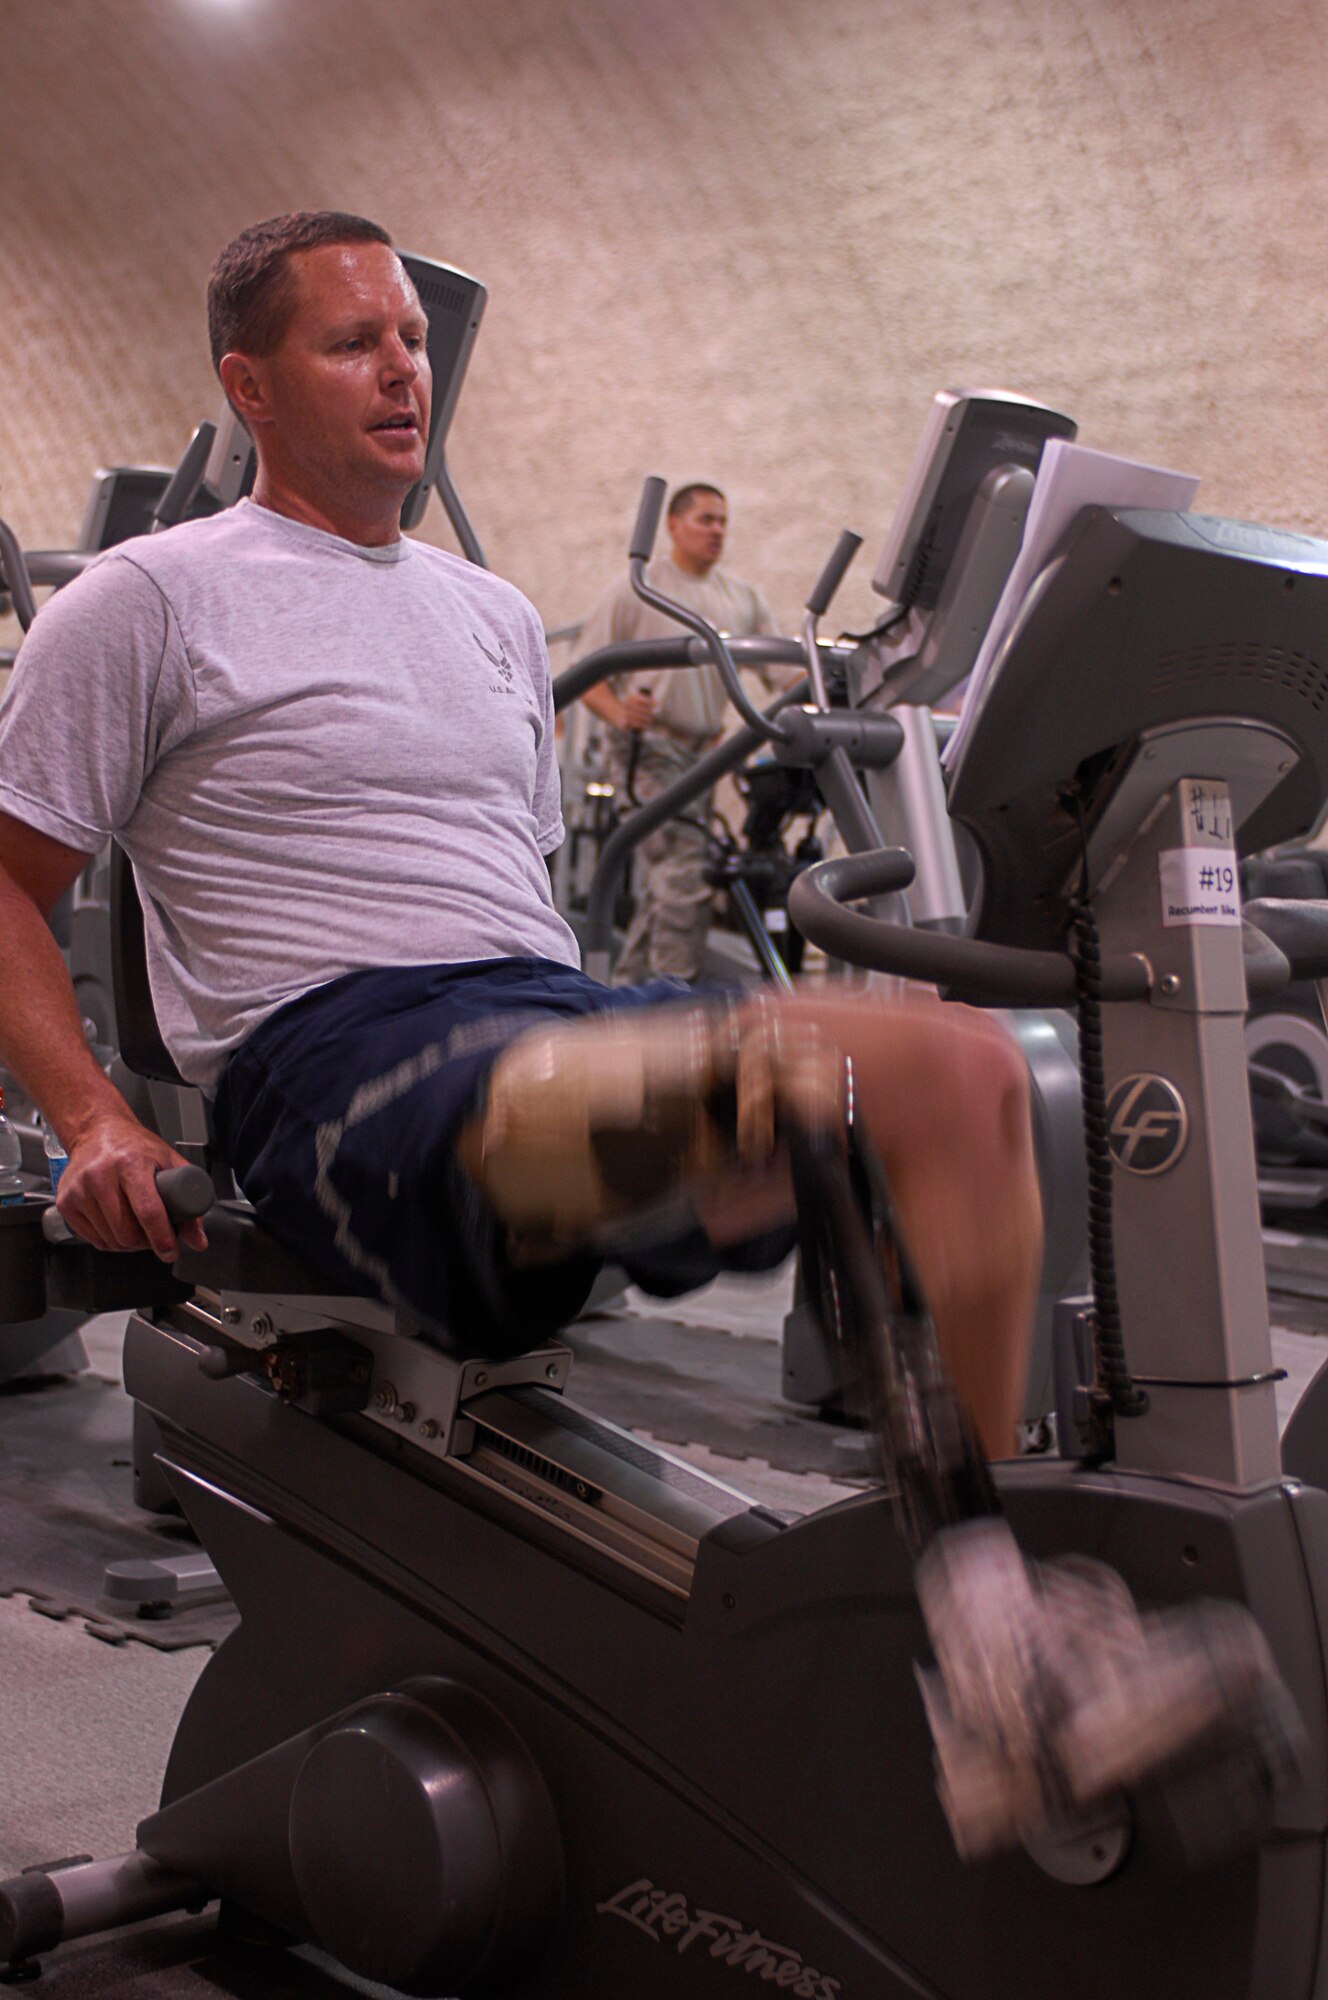 Maj. Alan Brown, 774th Expeditionary Airlift Squadron, rides a stationary bicycle at Bagram Air Field, Afghanistan, March 21. Major Brown is an amputee C-130 Pilot, deployed from the 187th Airlift Squadron, Wyoming Air National Guard, Cheyenne, Wyo. He lost his leg in a hunting accident 10 years ago and after seven years regained his qualifcations to fly. Major Brown works out daily riding the stationary bike using a custom strap developed by the Unit's life support crew. (U.S. Air Force photo/ Senior Airman Erik Cardenas)(Released)